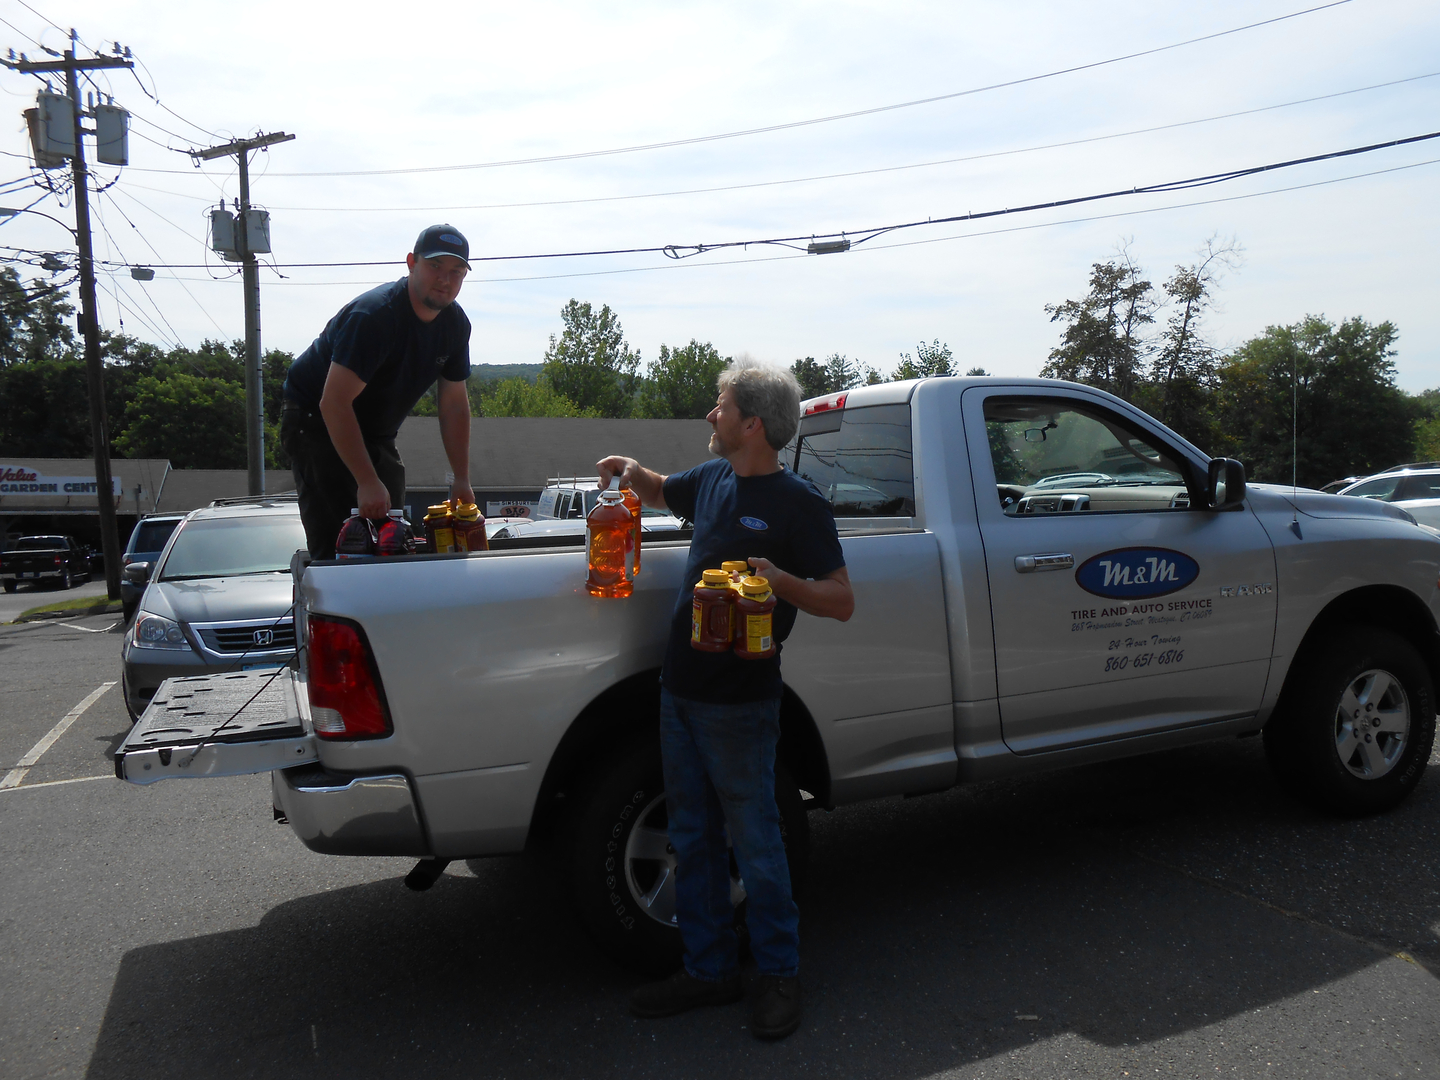 Owner Bill Walsh and Tech Andrew unload supplies at the Simsbury Food Pantry | M & M Auto Group